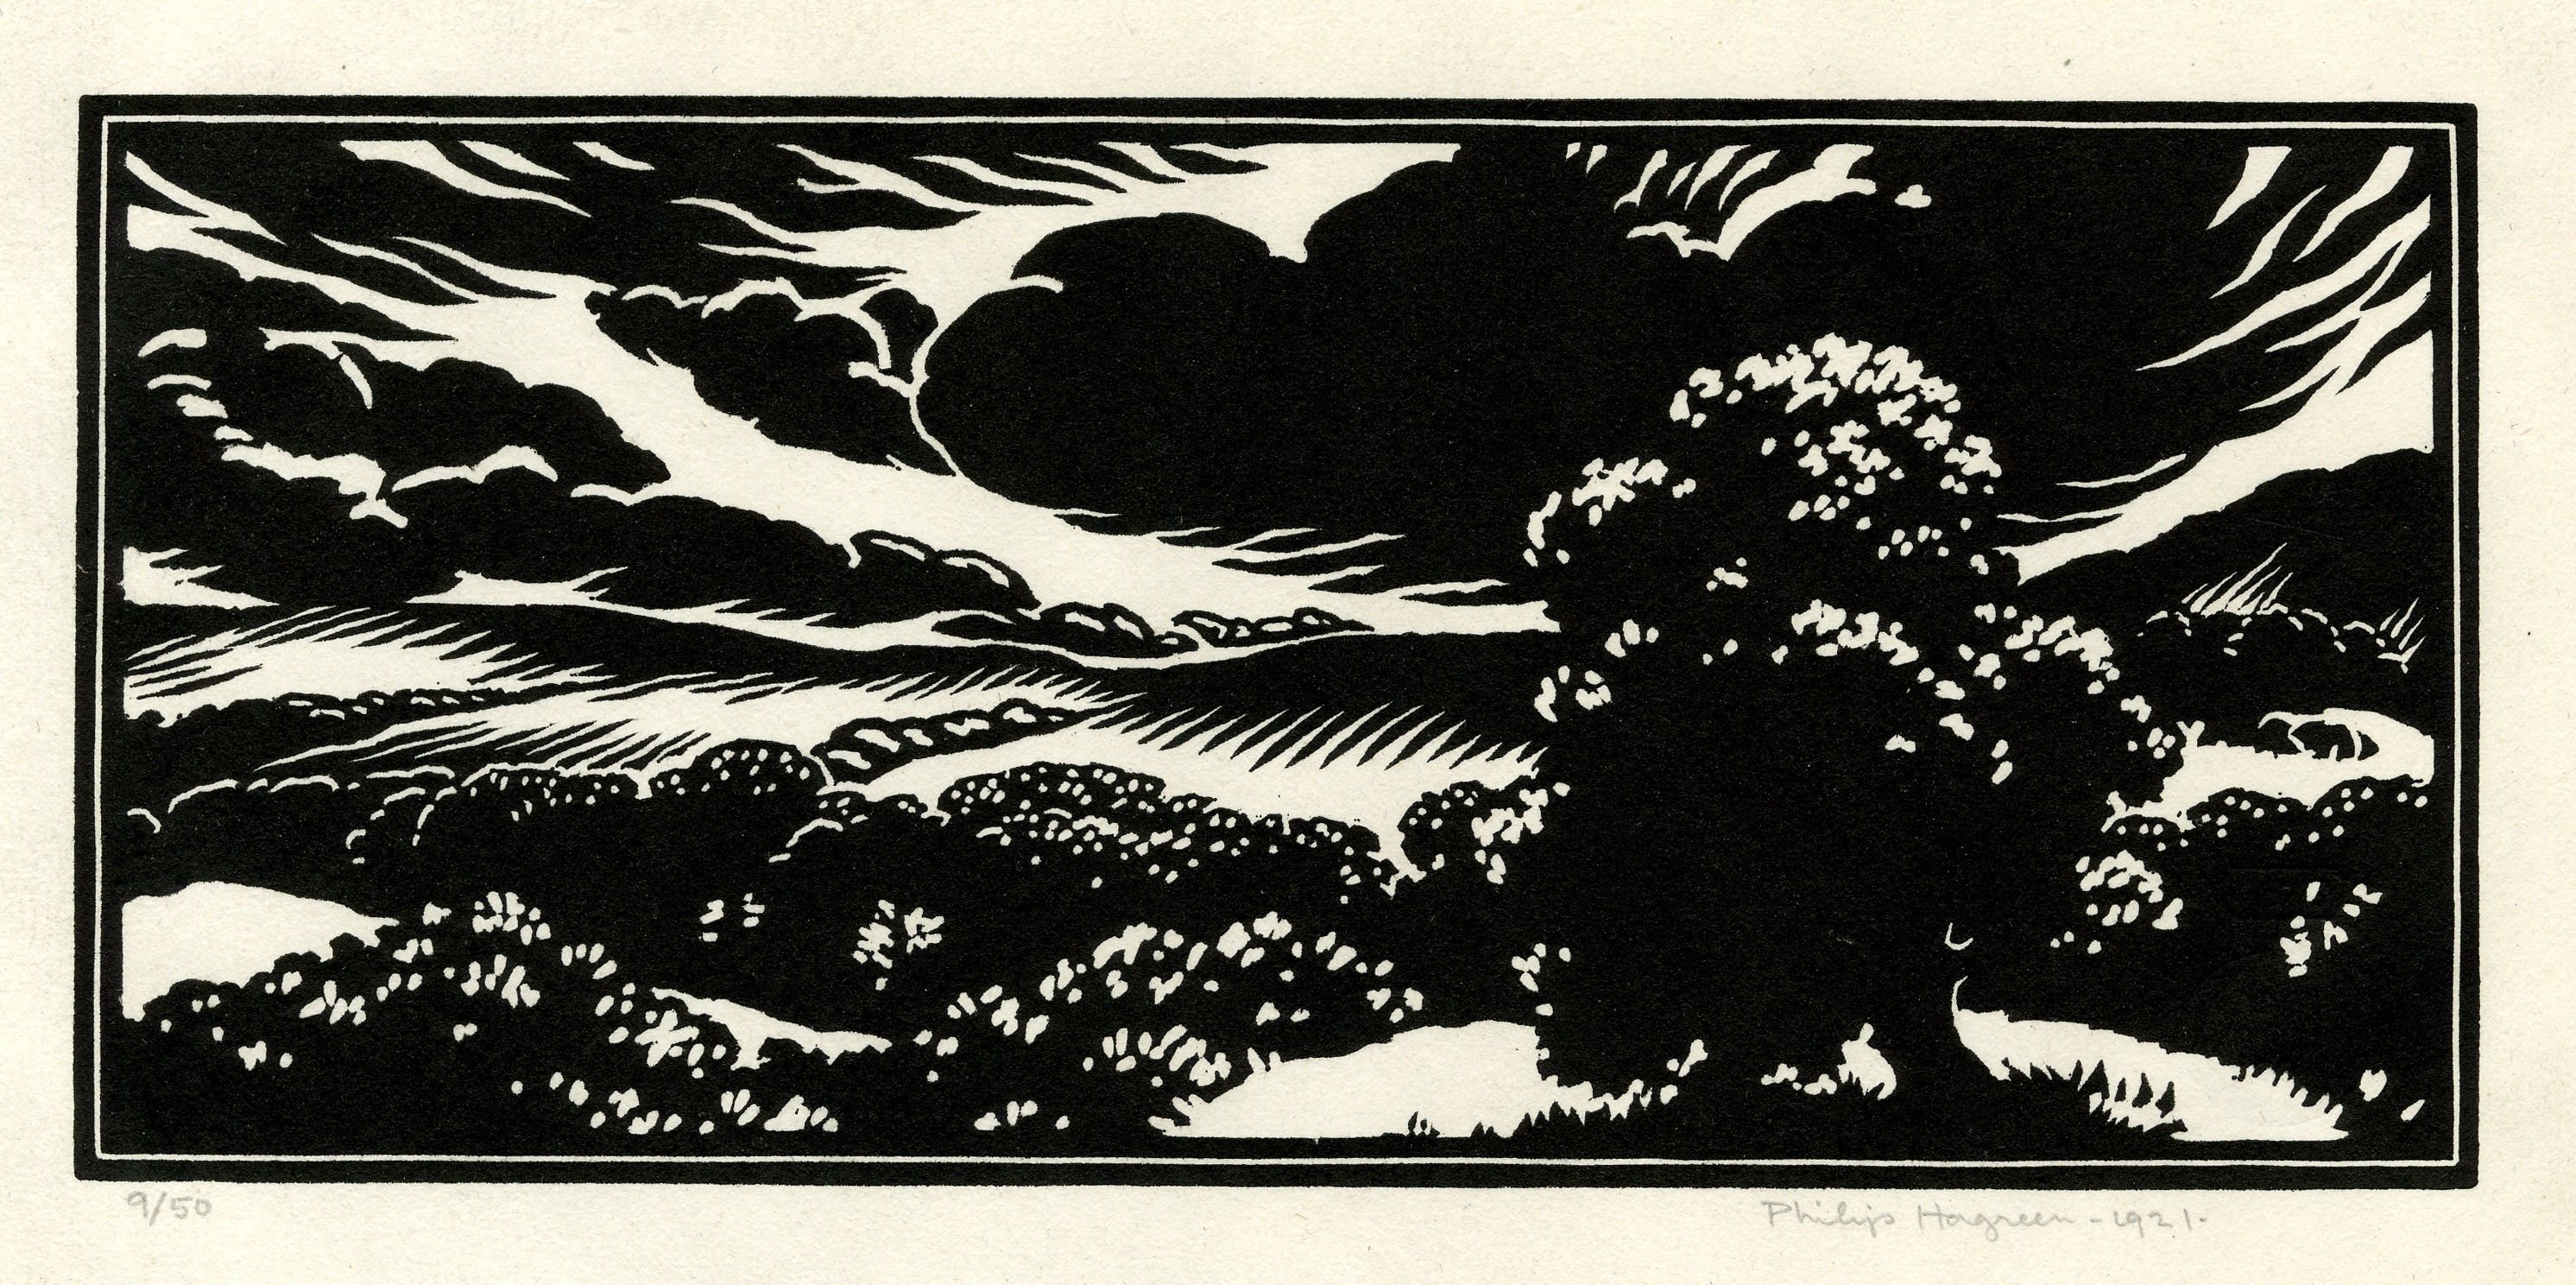 A Valley without a Name (1921)